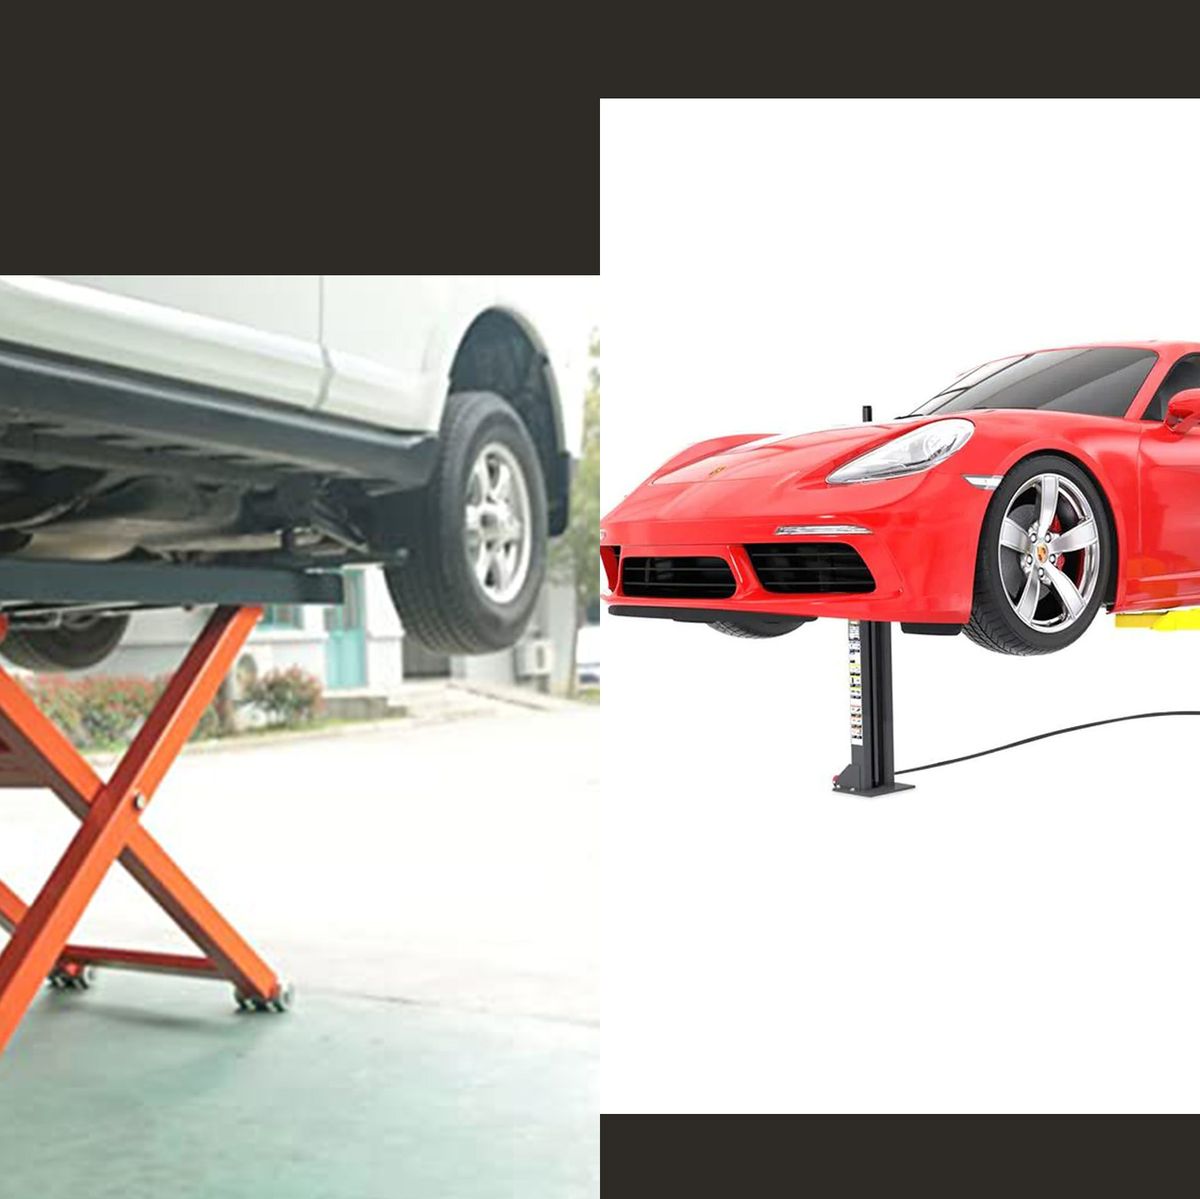 Experts Recommend These Vehicle Lifts - Car and Driver